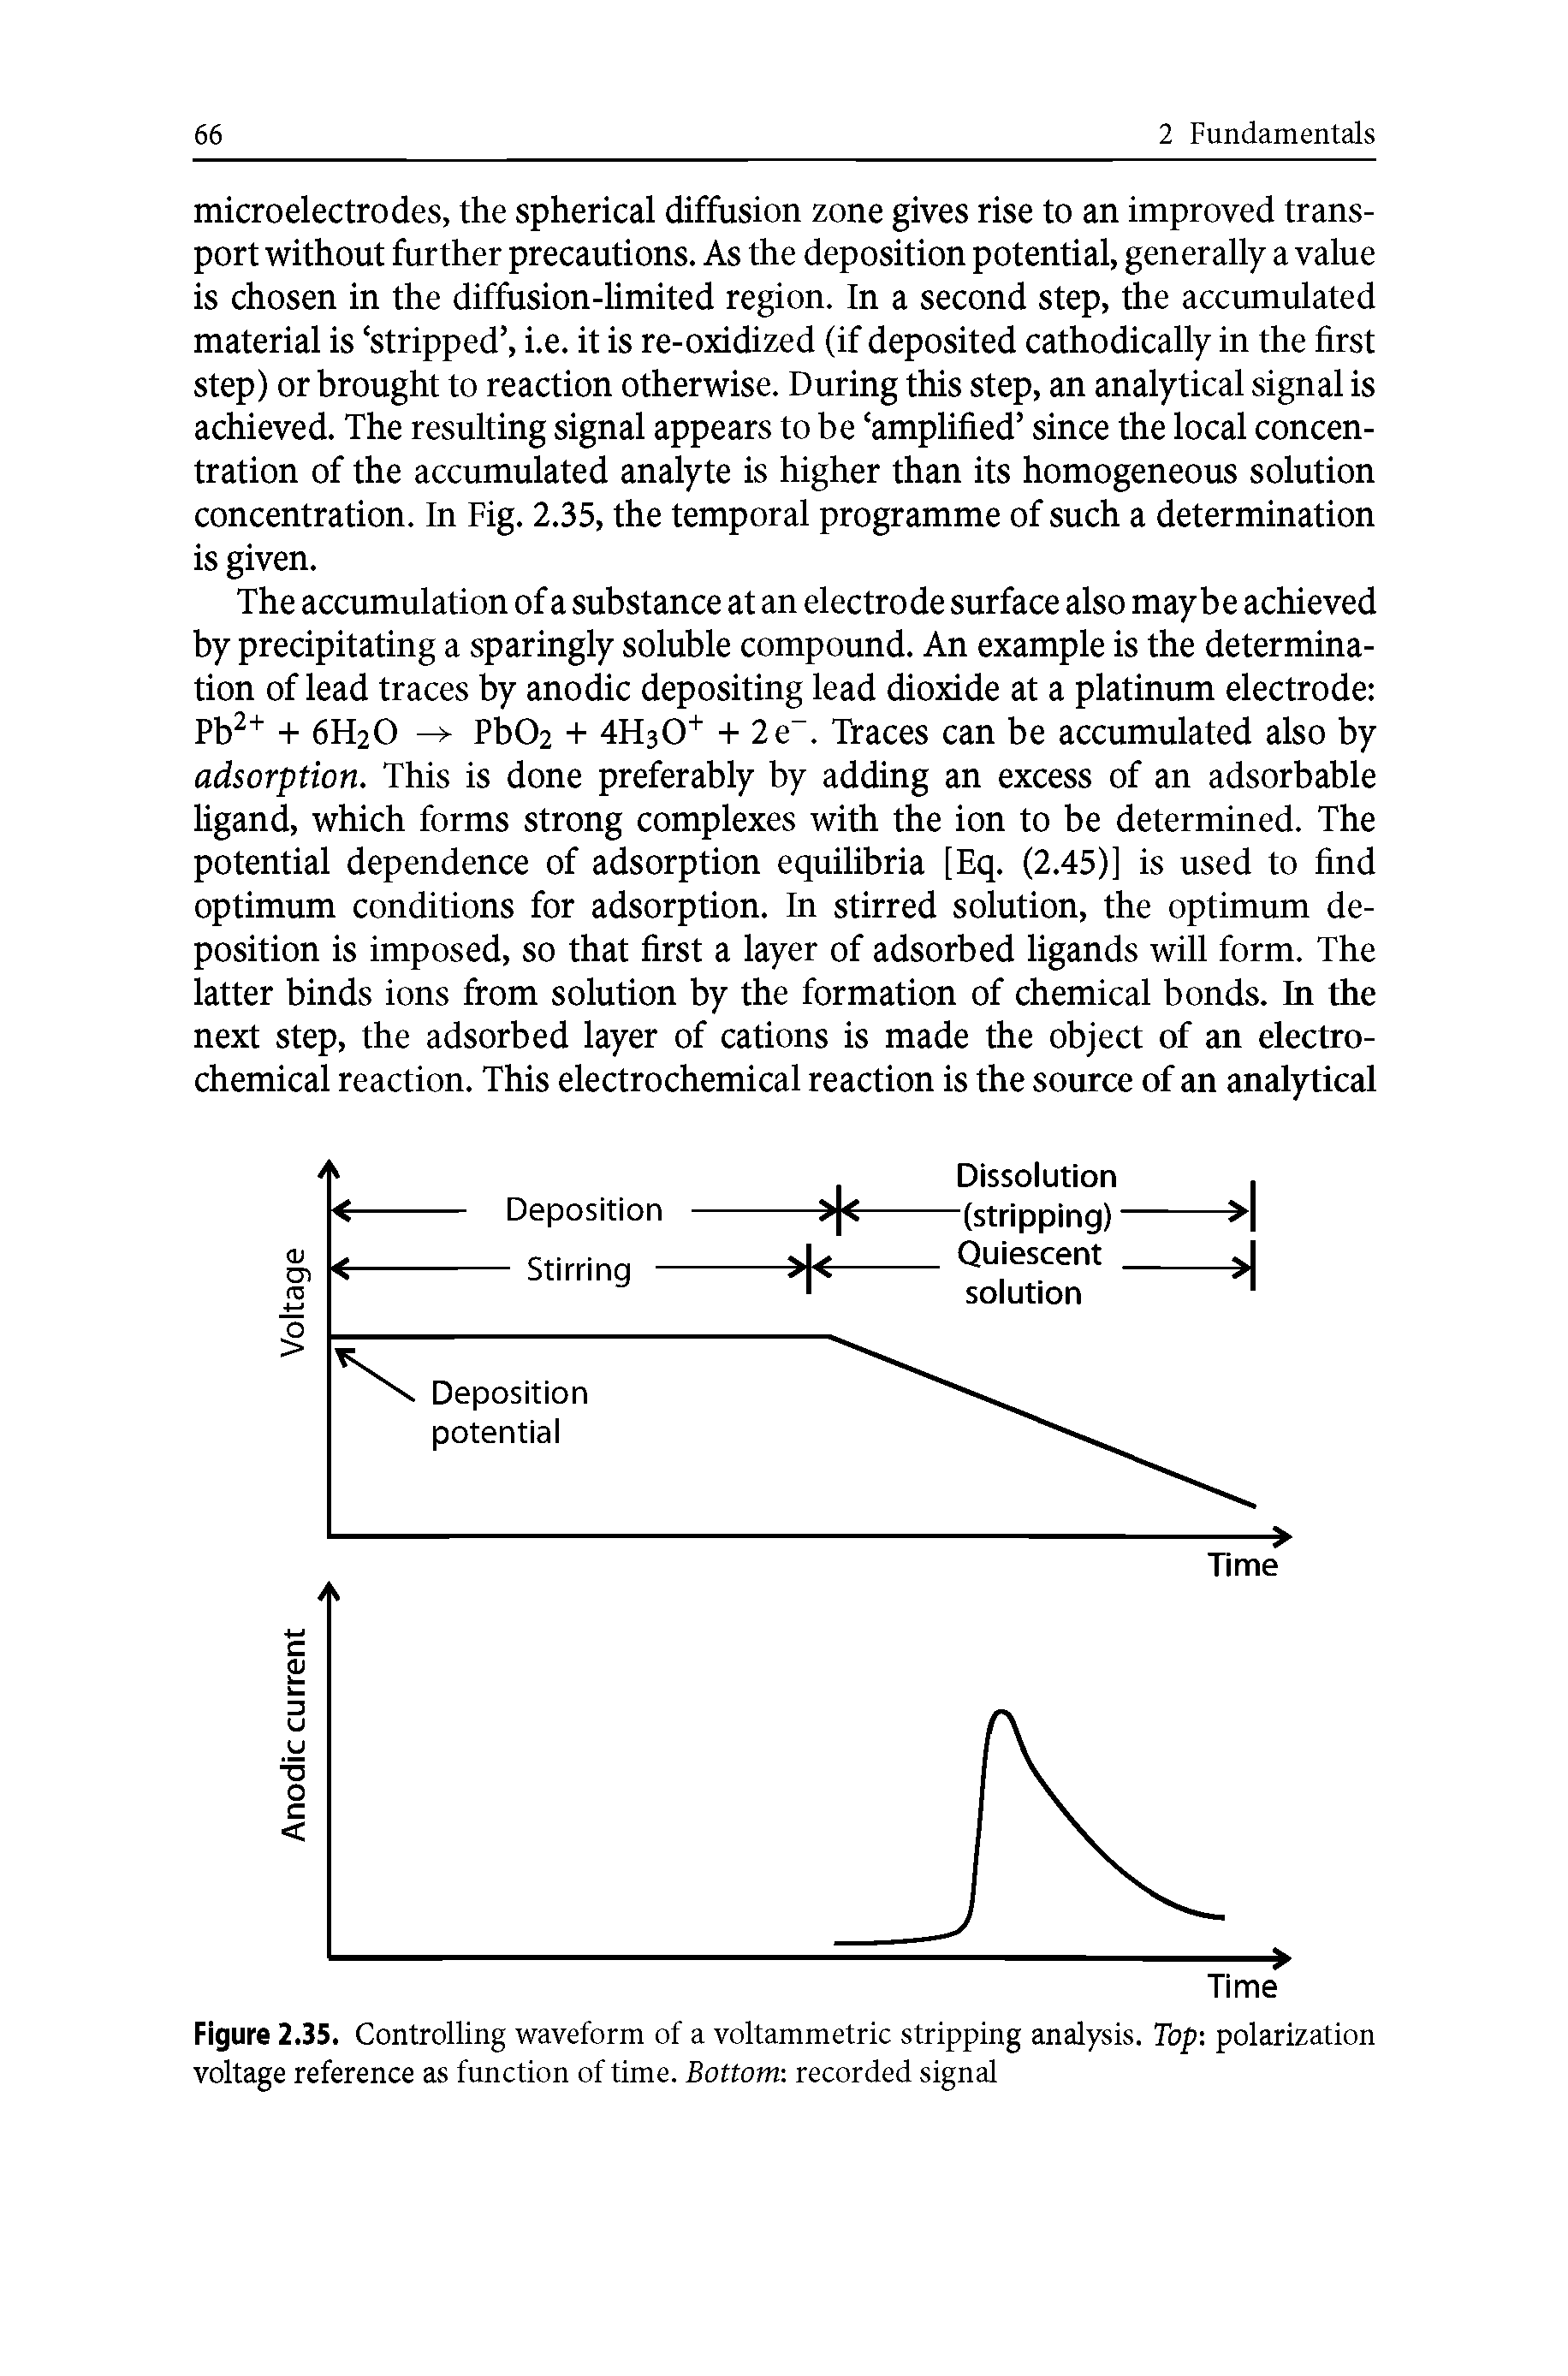 Figure 2.35. Controlling waveform of a voltammetric stripping analysis. Top polarization voltage reference as function of time. Bottom recorded signal...